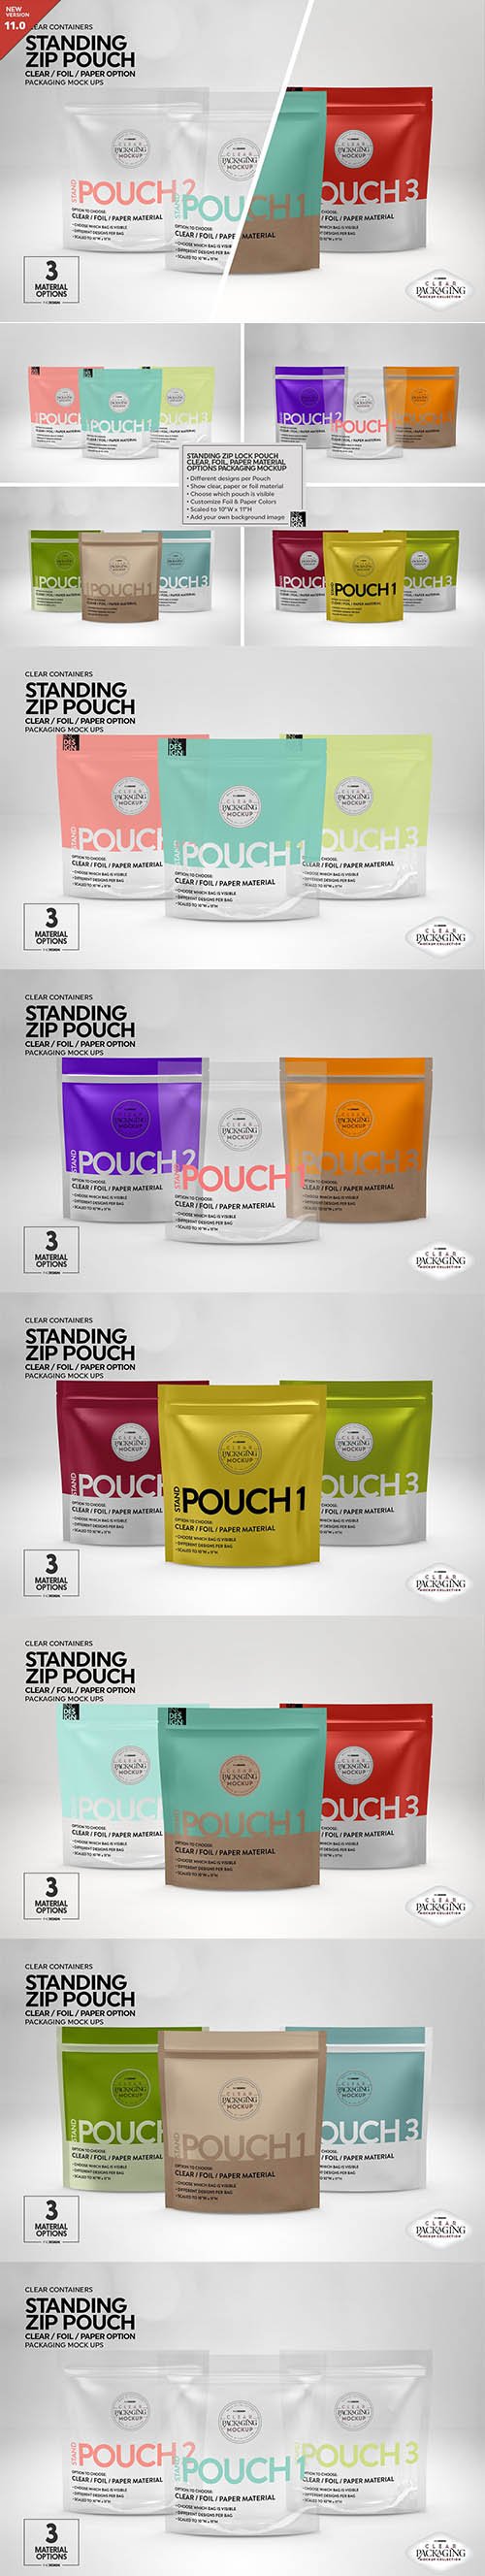 Clear Foil Paper Stand Pouch Mockup